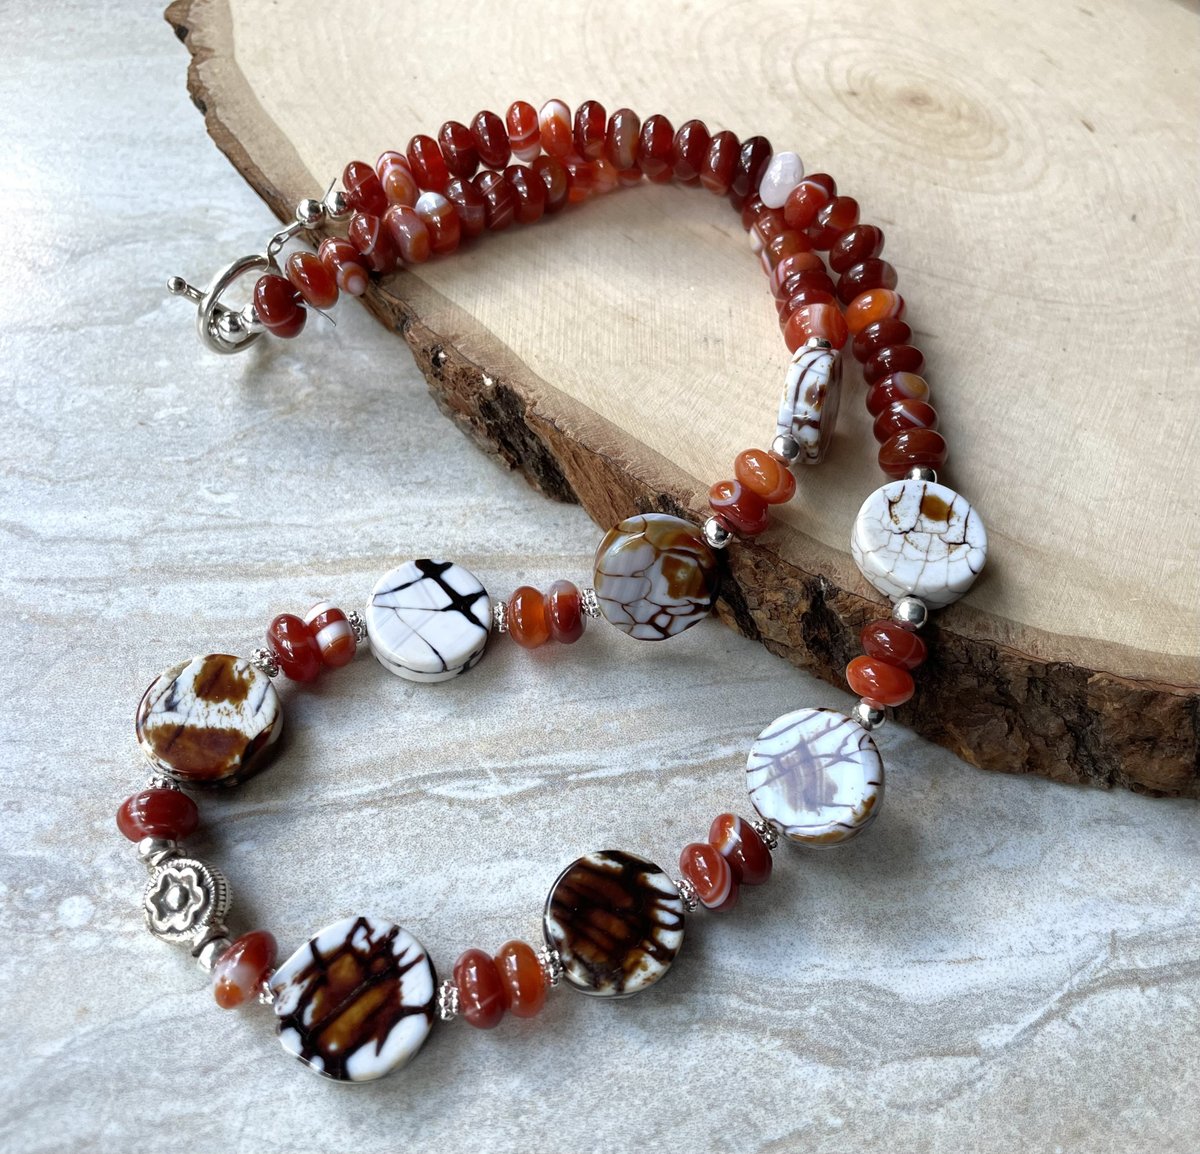 Rustic Agate Carnilian Necklace, Coin Beads, Casual Gemstone Brown Red Beaded Necklace tuppu.net/24936dbb #Handcrafted #JemsbyJBandCompany #Jewelry trends